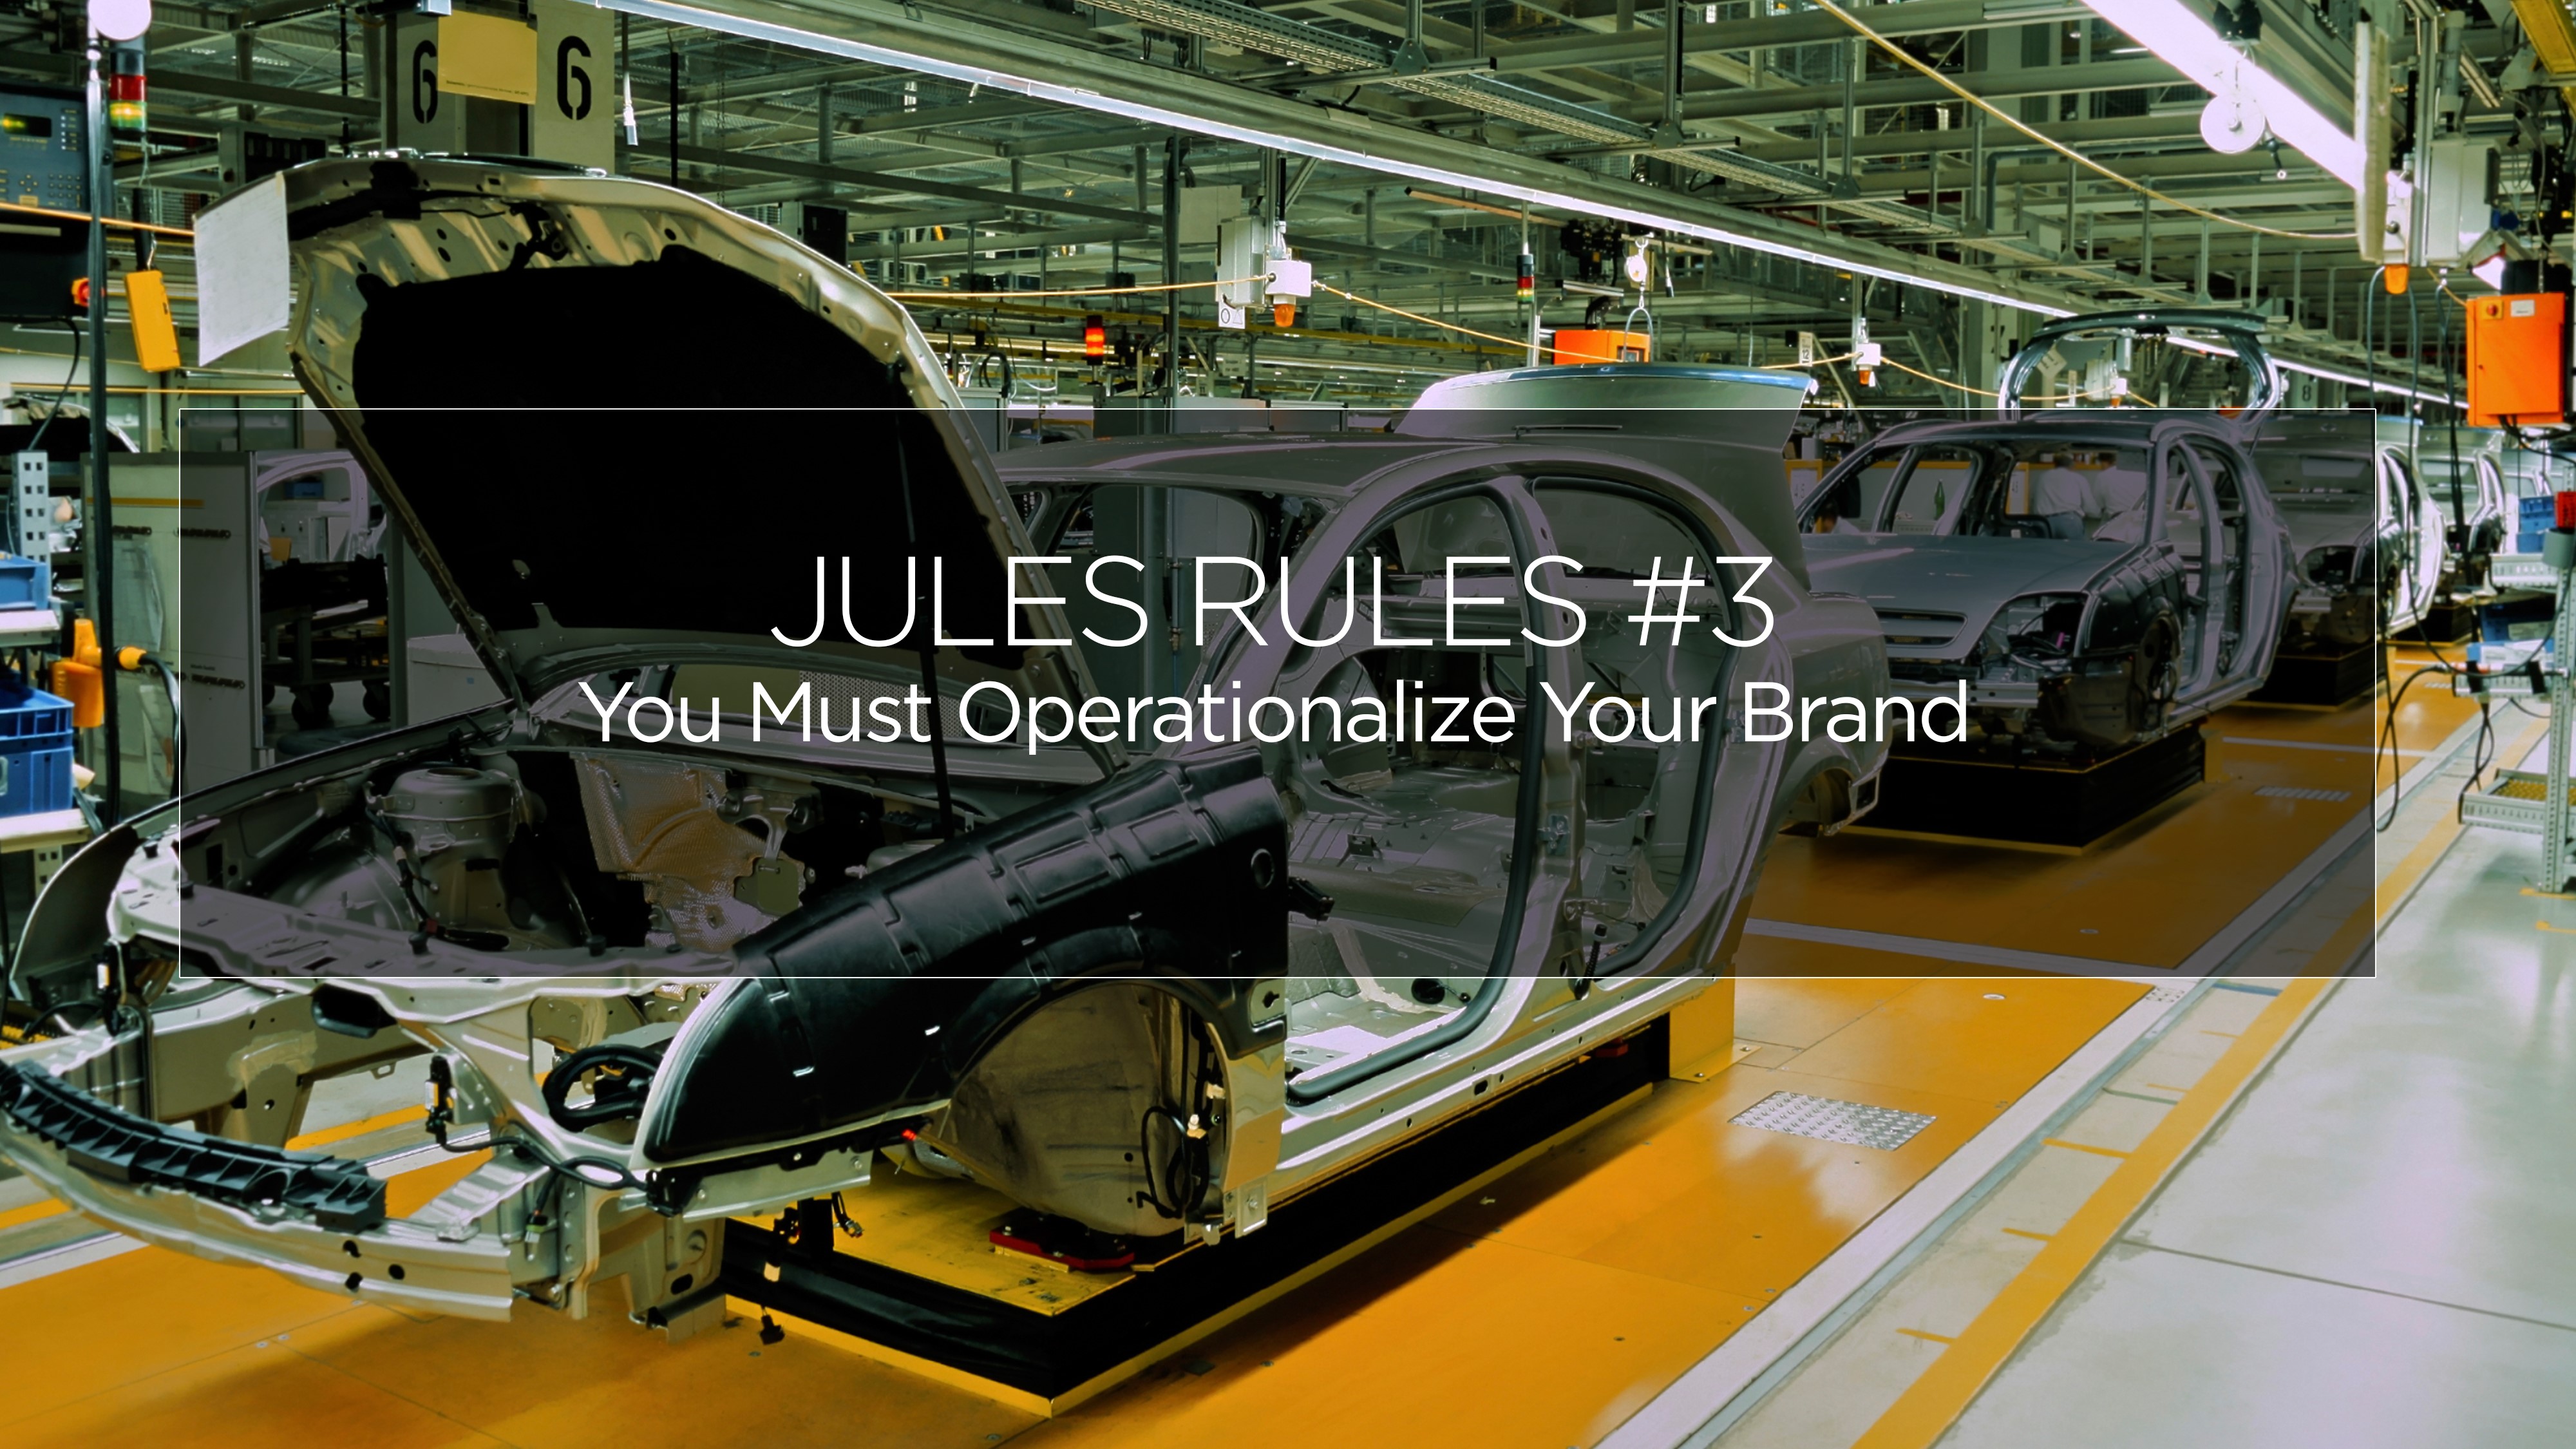 Operationalization of Your Brand